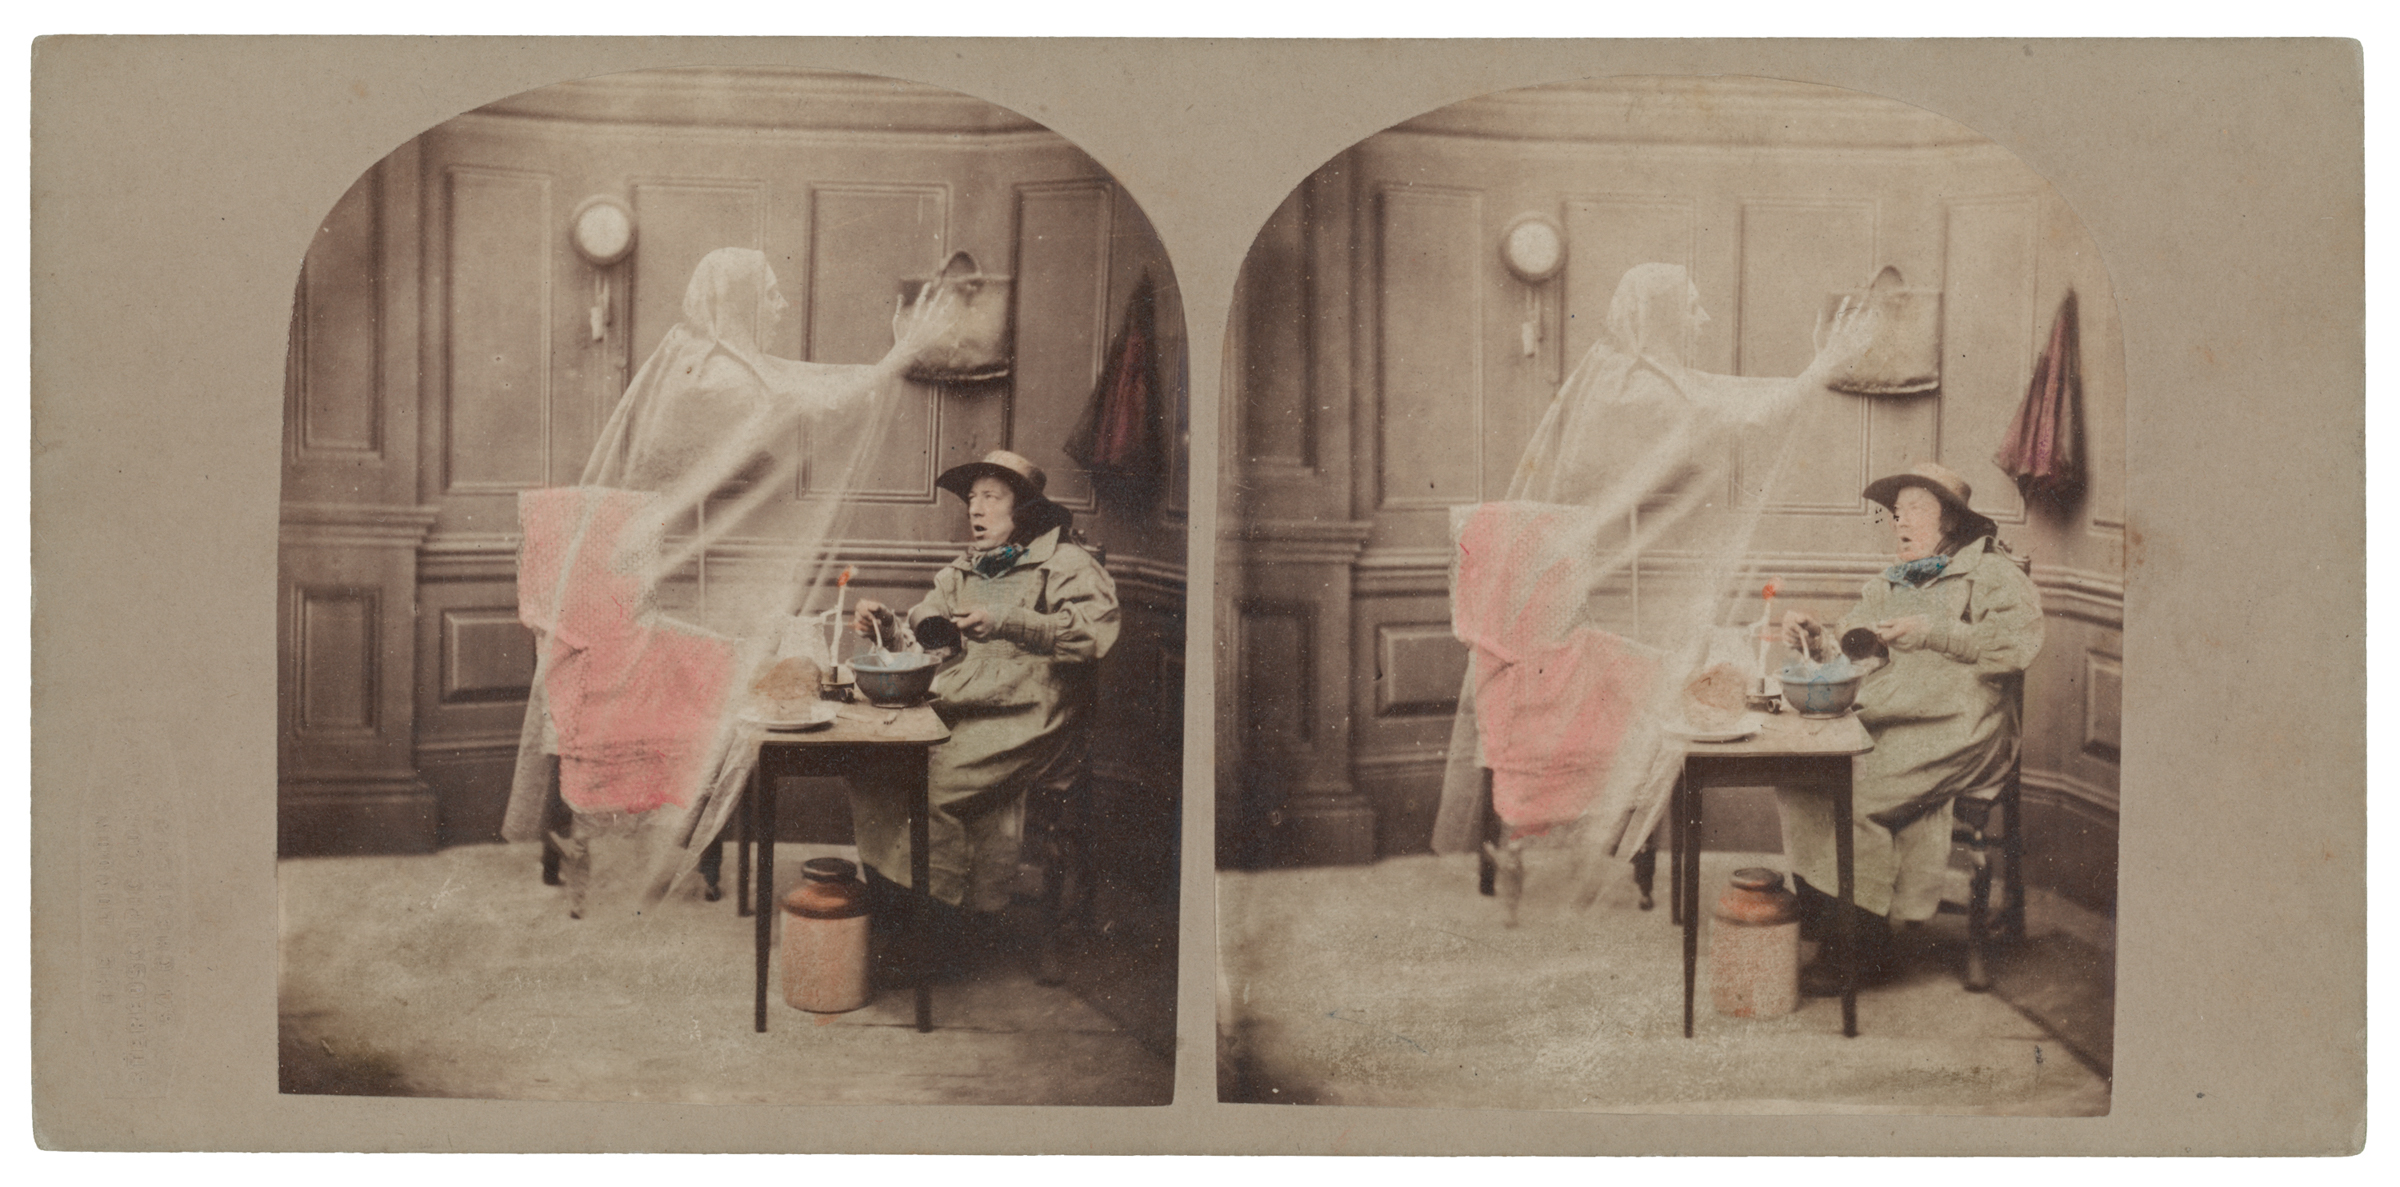     Unidentified photographer, The Ghost in the Stereoscope, c1856 (albumen prints mounted on card (stereocard)). Courtesy of the Ryerson Image Centre, Gift of Dr. Martin J. Bass and Gail Silverman Bass, 2014

